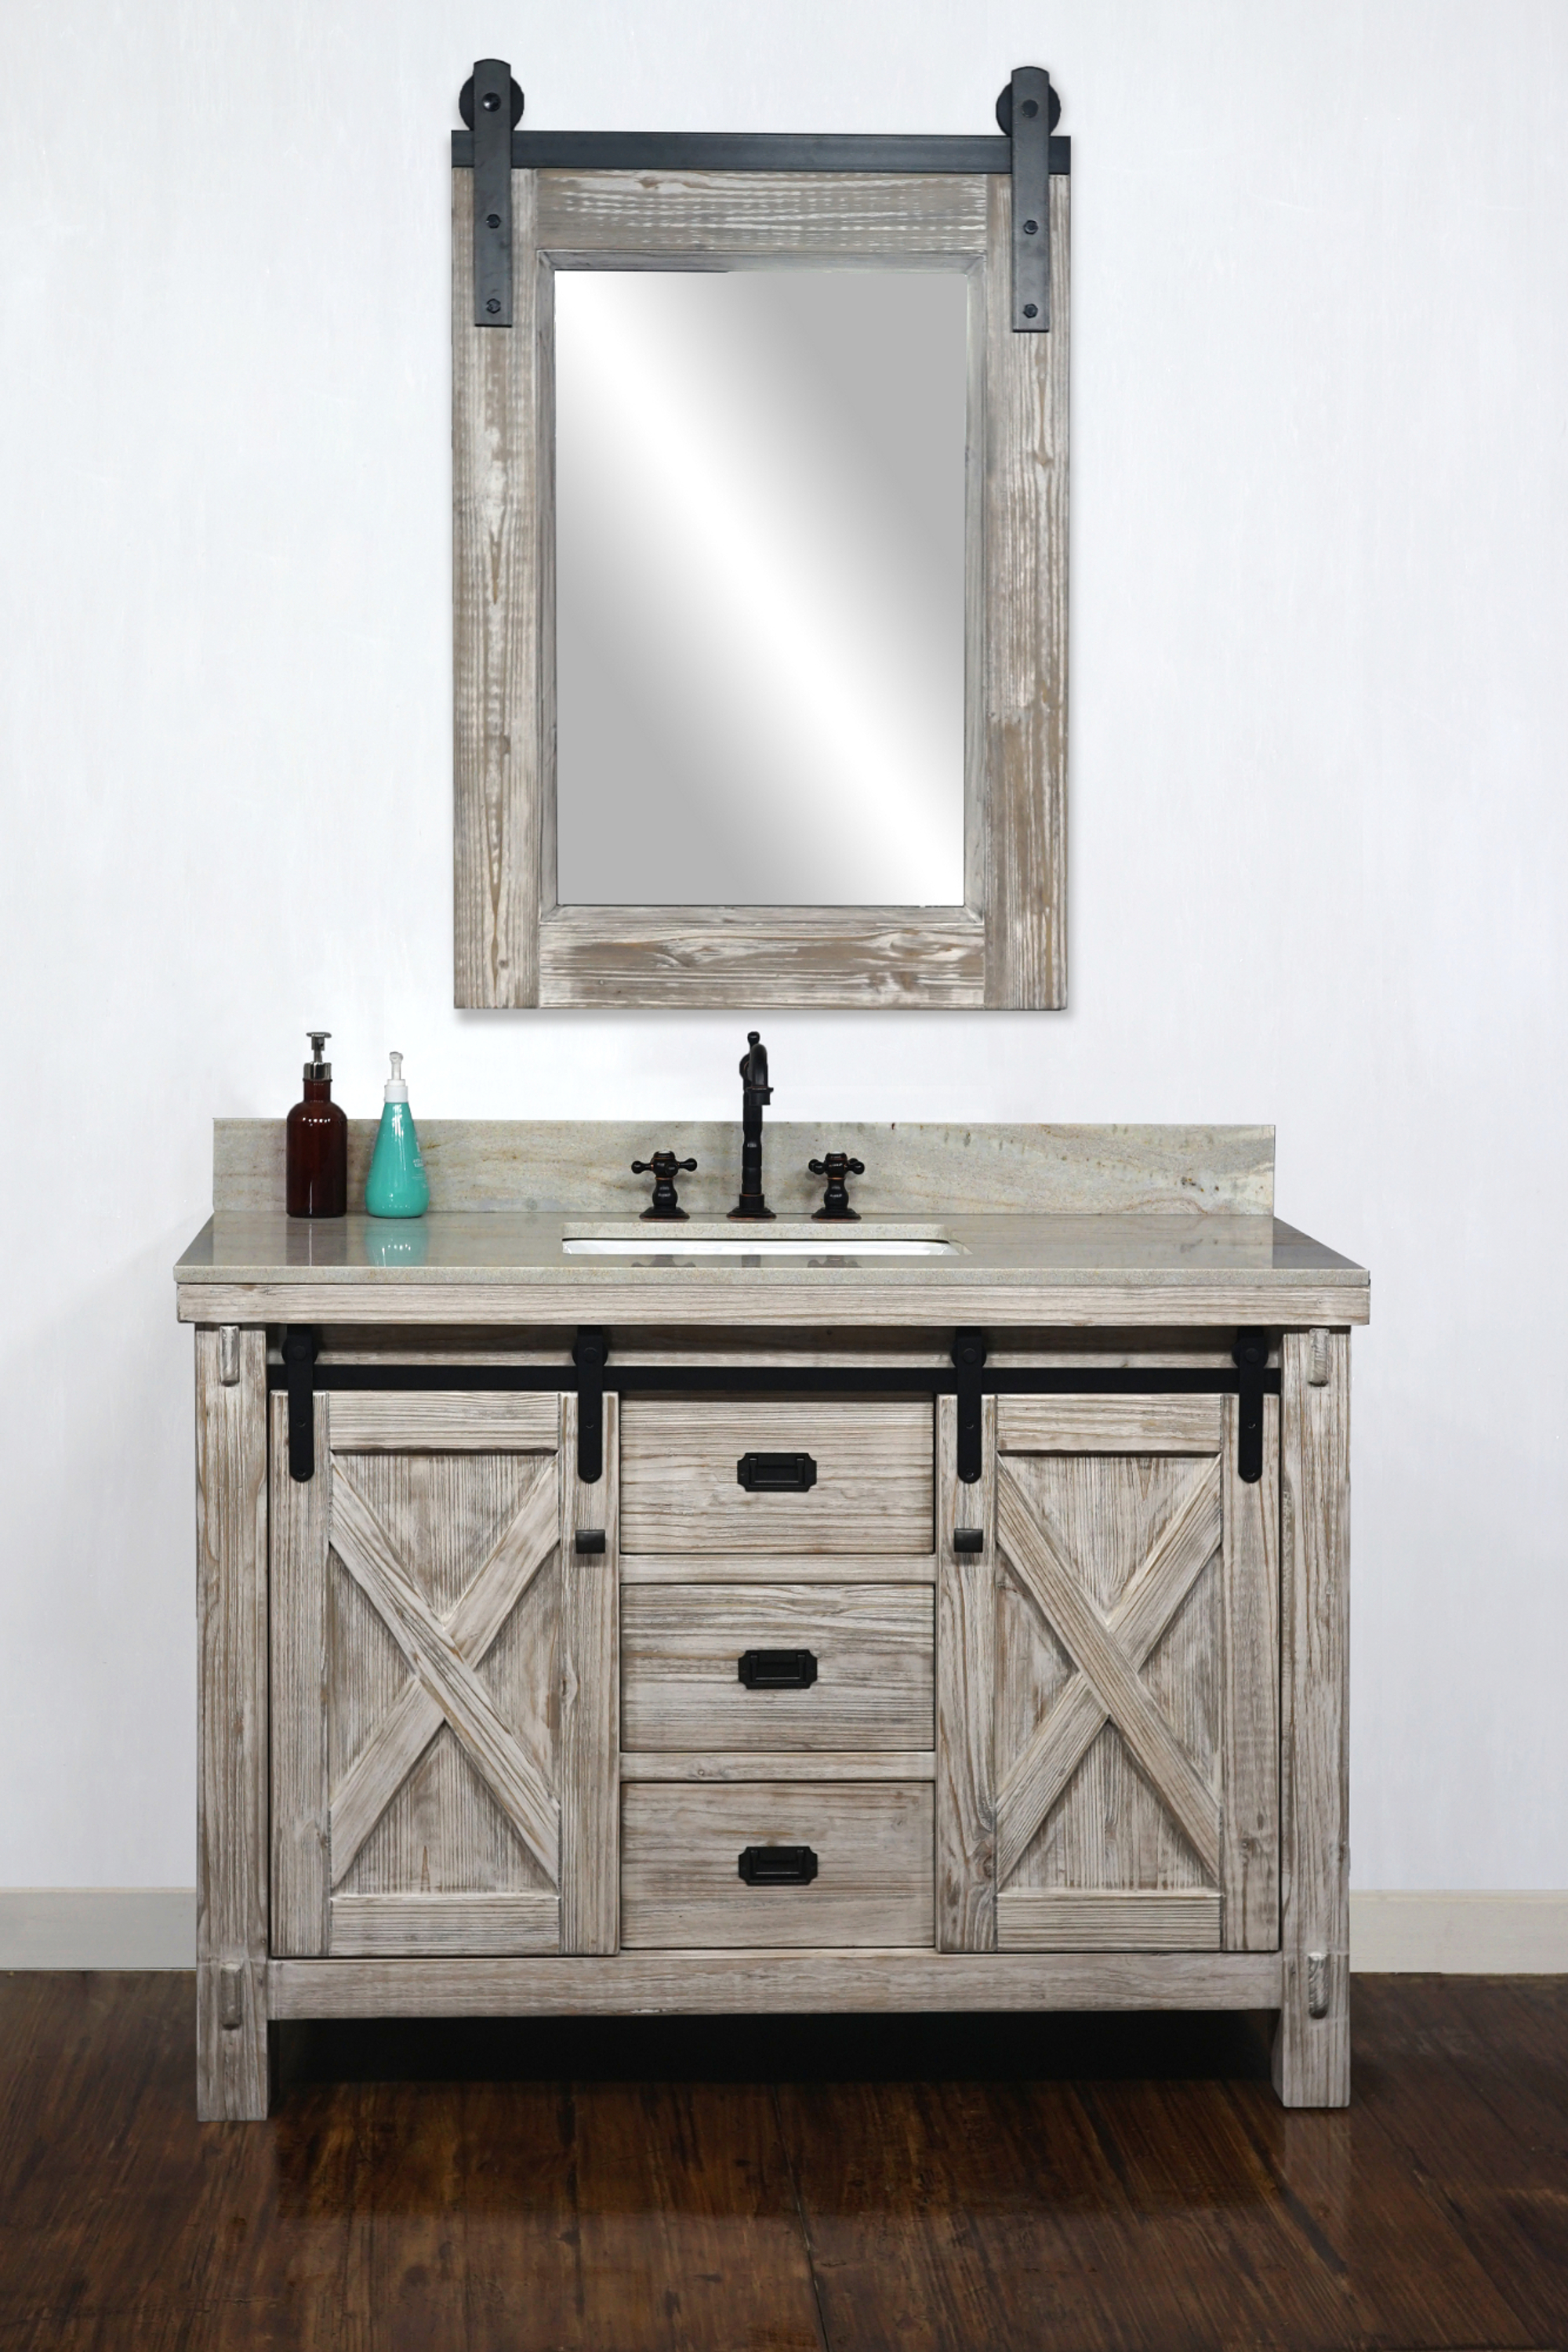 48" Rustic Solid Fir Barn Door Style Single Sink Vanity in White Washed